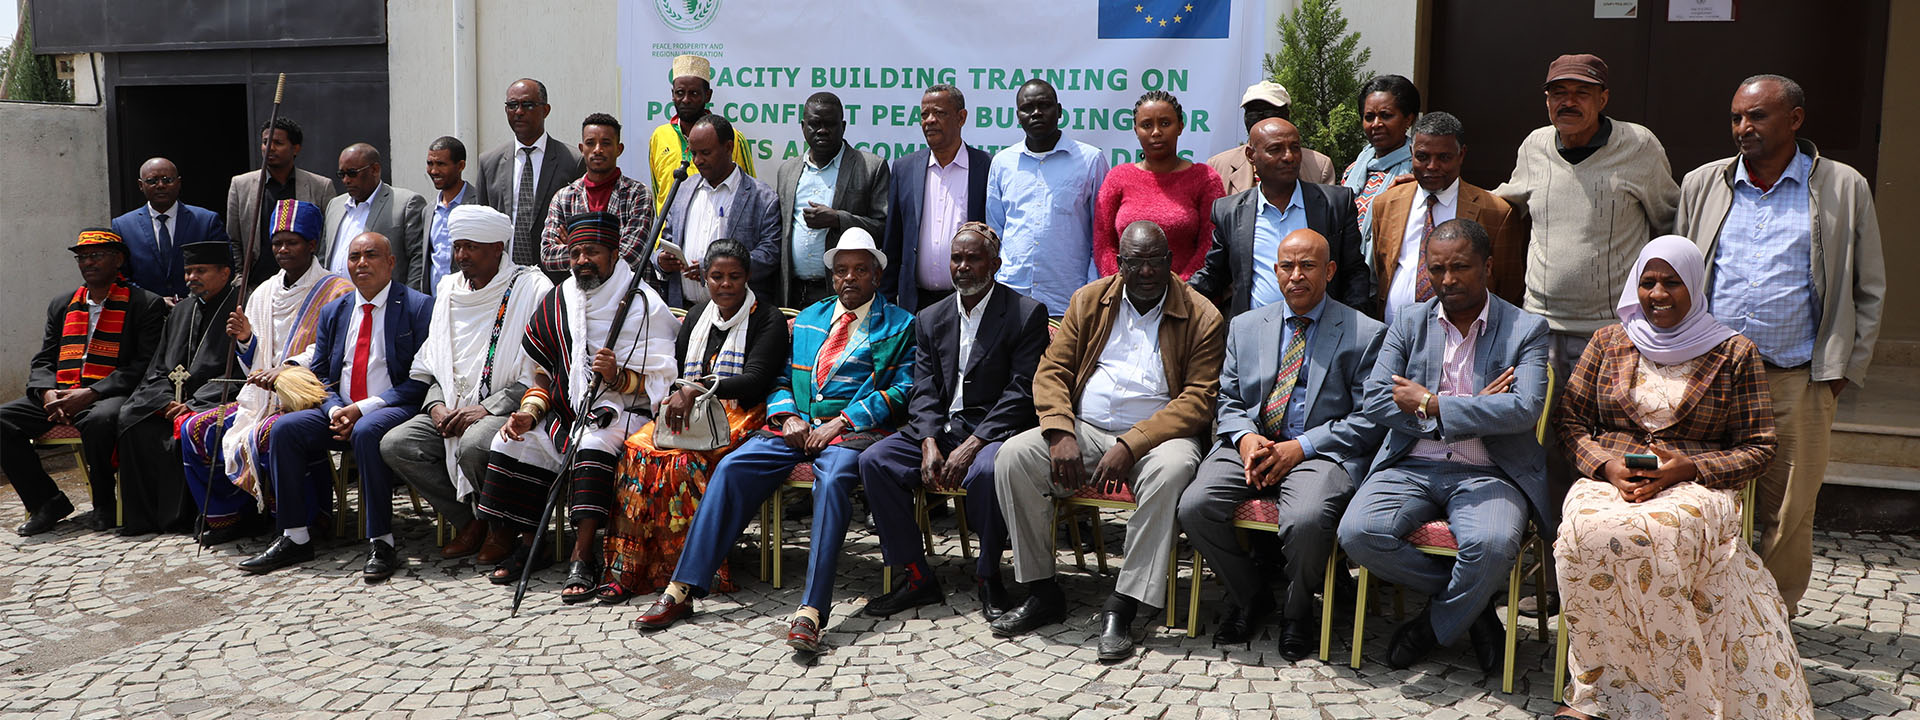 IGAD PSD Organized Capacity Building Training on Post Conflict Peace Building for Religious, Community and Youth Leaders